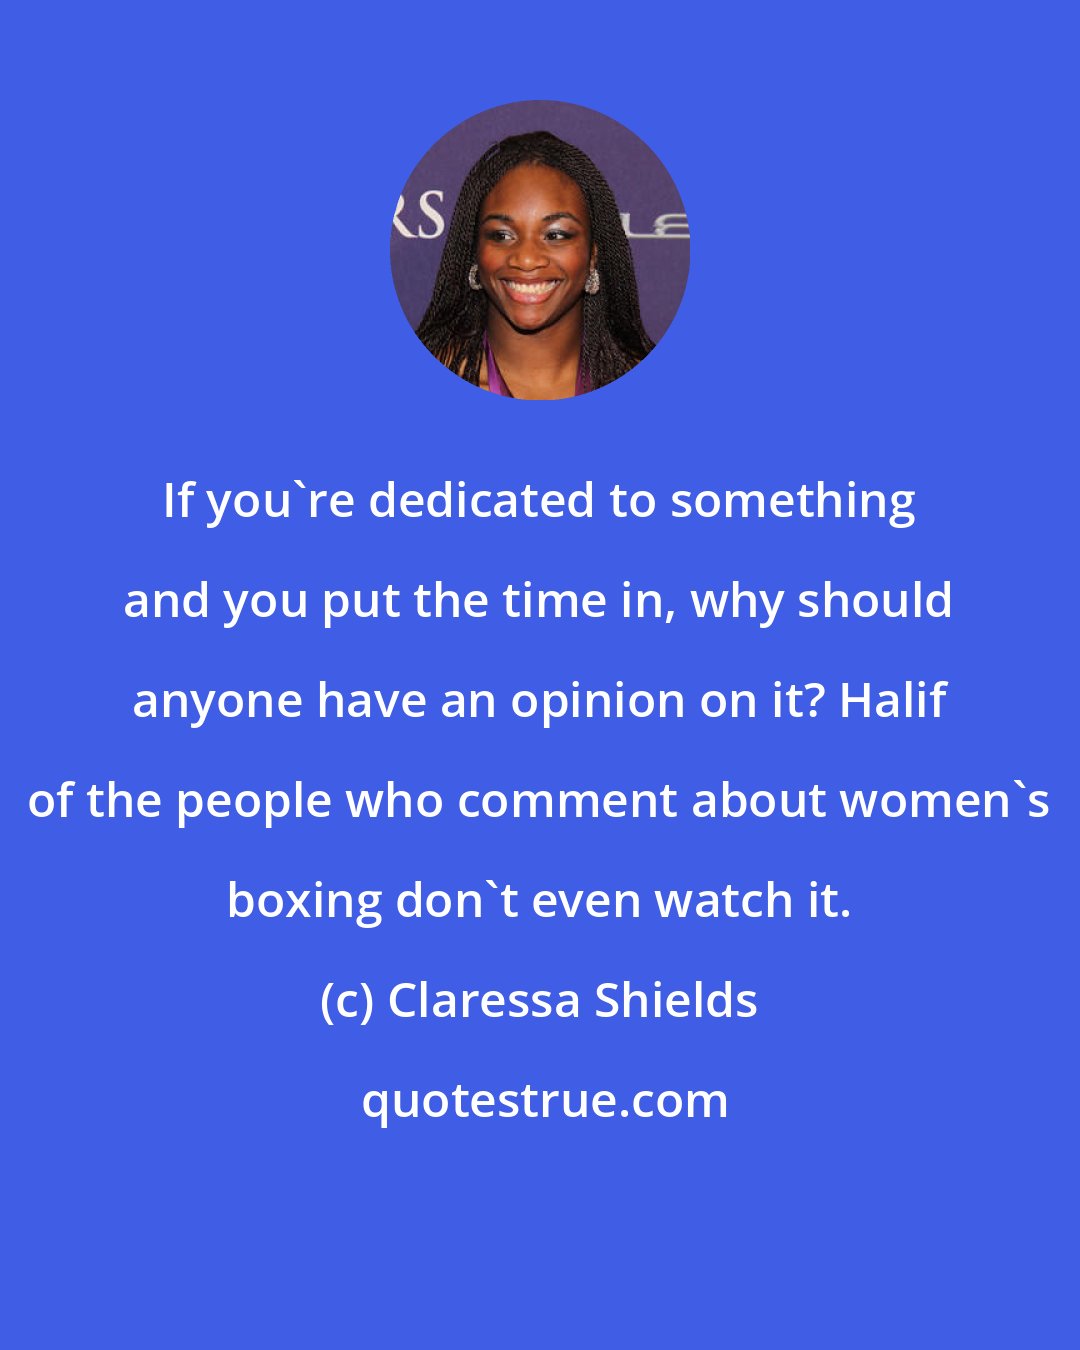 Claressa Shields: If you're dedicated to something and you put the time in, why should anyone have an opinion on it? Halif of the people who comment about women's boxing don't even watch it.